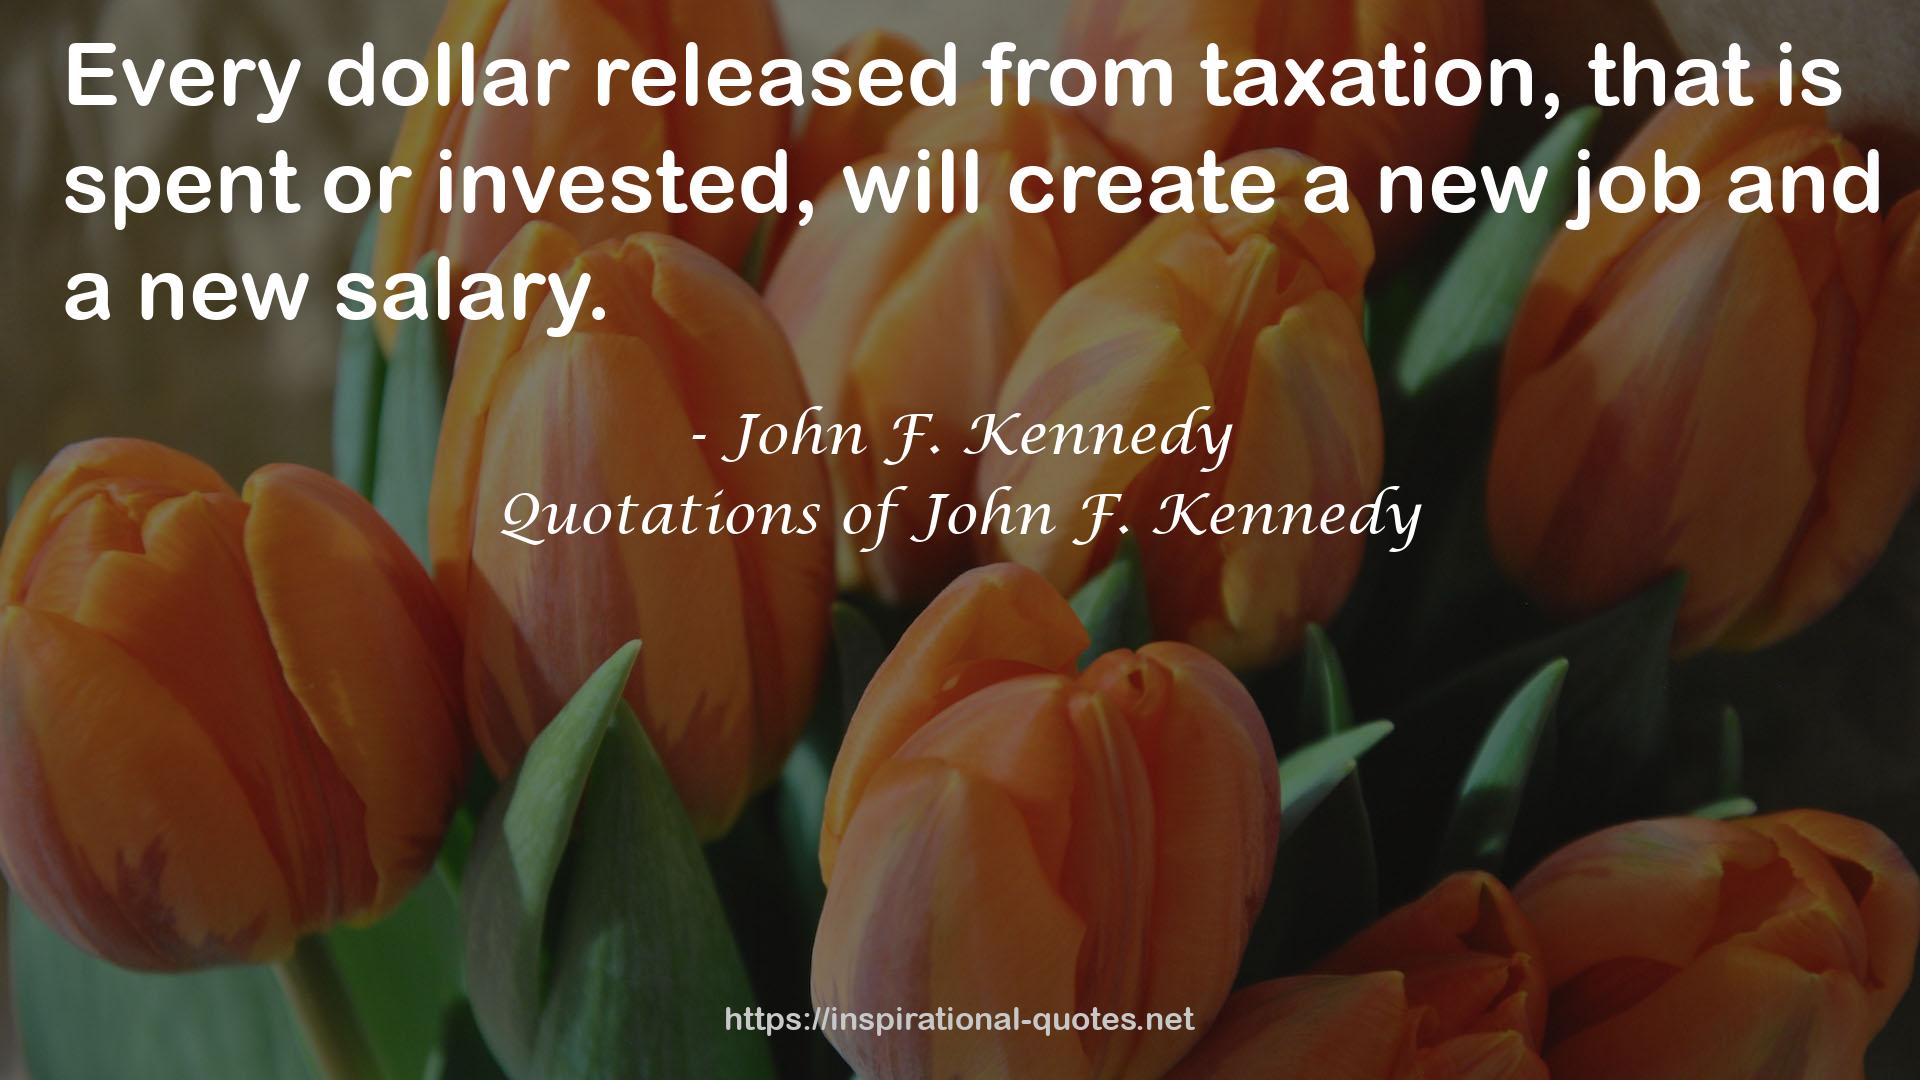 Quotations of John F. Kennedy QUOTES